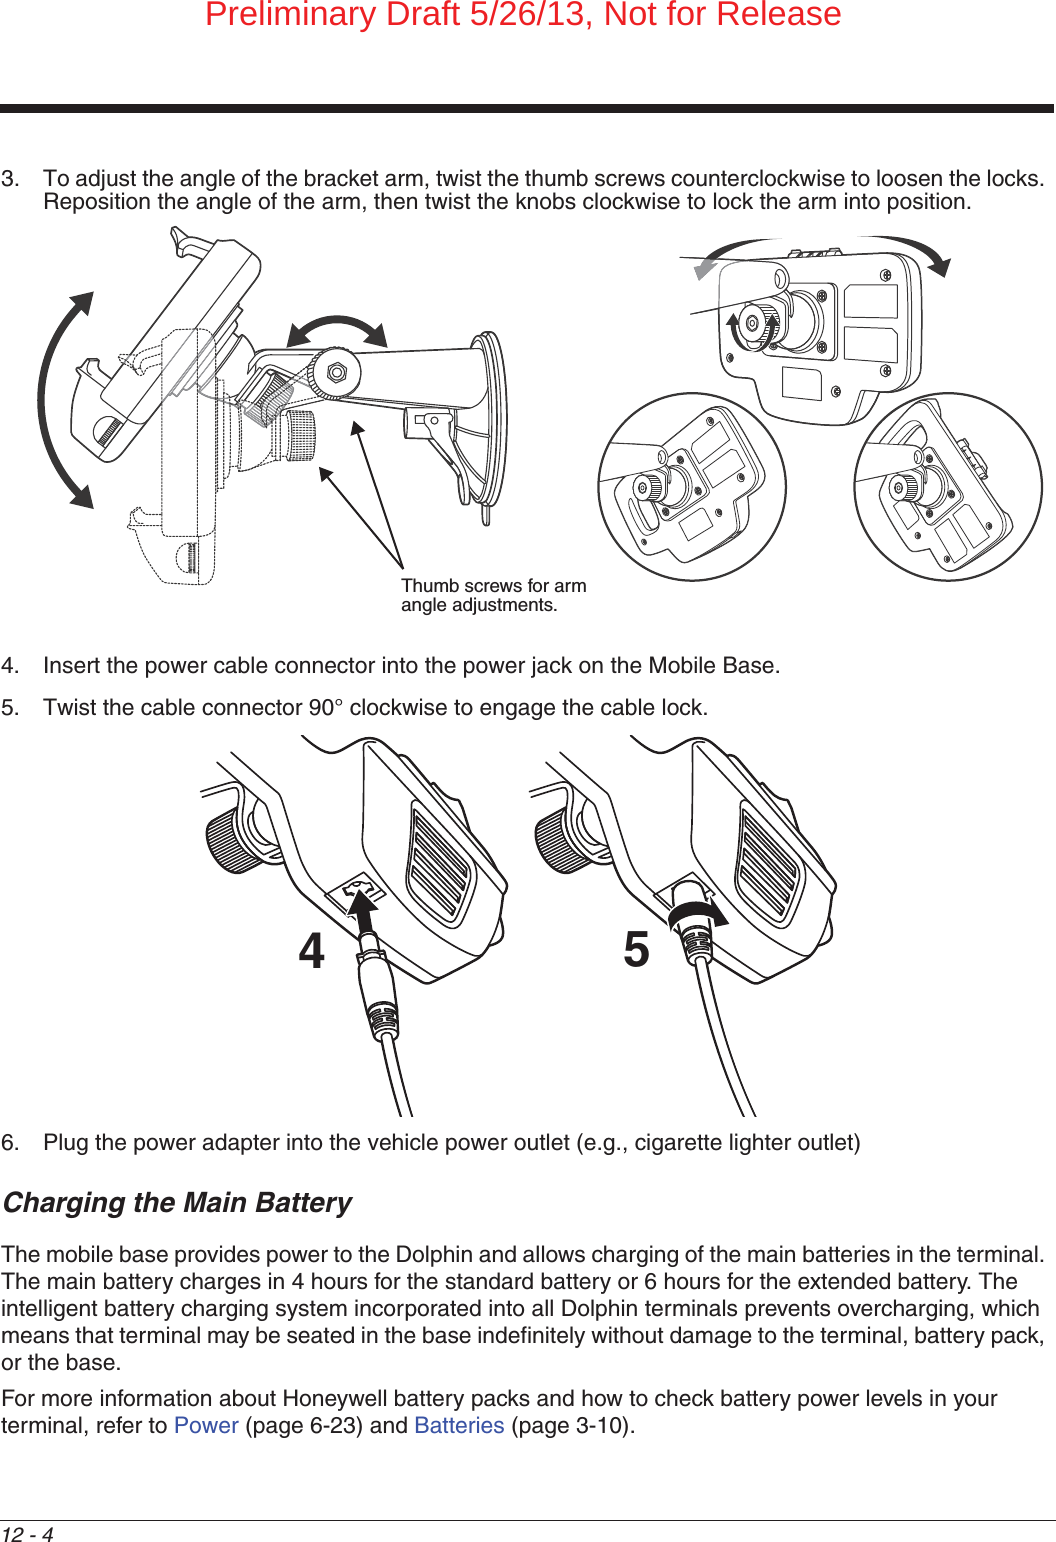 12 - 43. To adjust the angle of the bracket arm, twist the thumb screws counterclockwise to loosen the locks. Reposition the angle of the arm, then twist the knobs clockwise to lock the arm into position.4. Insert the power cable connector into the power jack on the Mobile Base. 5. Twist the cable connector 90° clockwise to engage the cable lock. 6. Plug the power adapter into the vehicle power outlet (e.g., cigarette lighter outlet)Charging the Main BatteryThe mobile base provides power to the Dolphin and allows charging of the main batteries in the terminal. The main battery charges in 4 hours for the standard battery or 6 hours for the extended battery. The intelligent battery charging system incorporated into all Dolphin terminals prevents overcharging, which means that terminal may be seated in the base indefinitely without damage to the terminal, battery pack, or the base.For more information about Honeywell battery packs and how to check battery power levels in your terminal, refer to Power (page 6-23) and Batteries (page 3-10).Thumb screws for arm angle adjustments.54Preliminary Draft 5/26/13, Not for Release